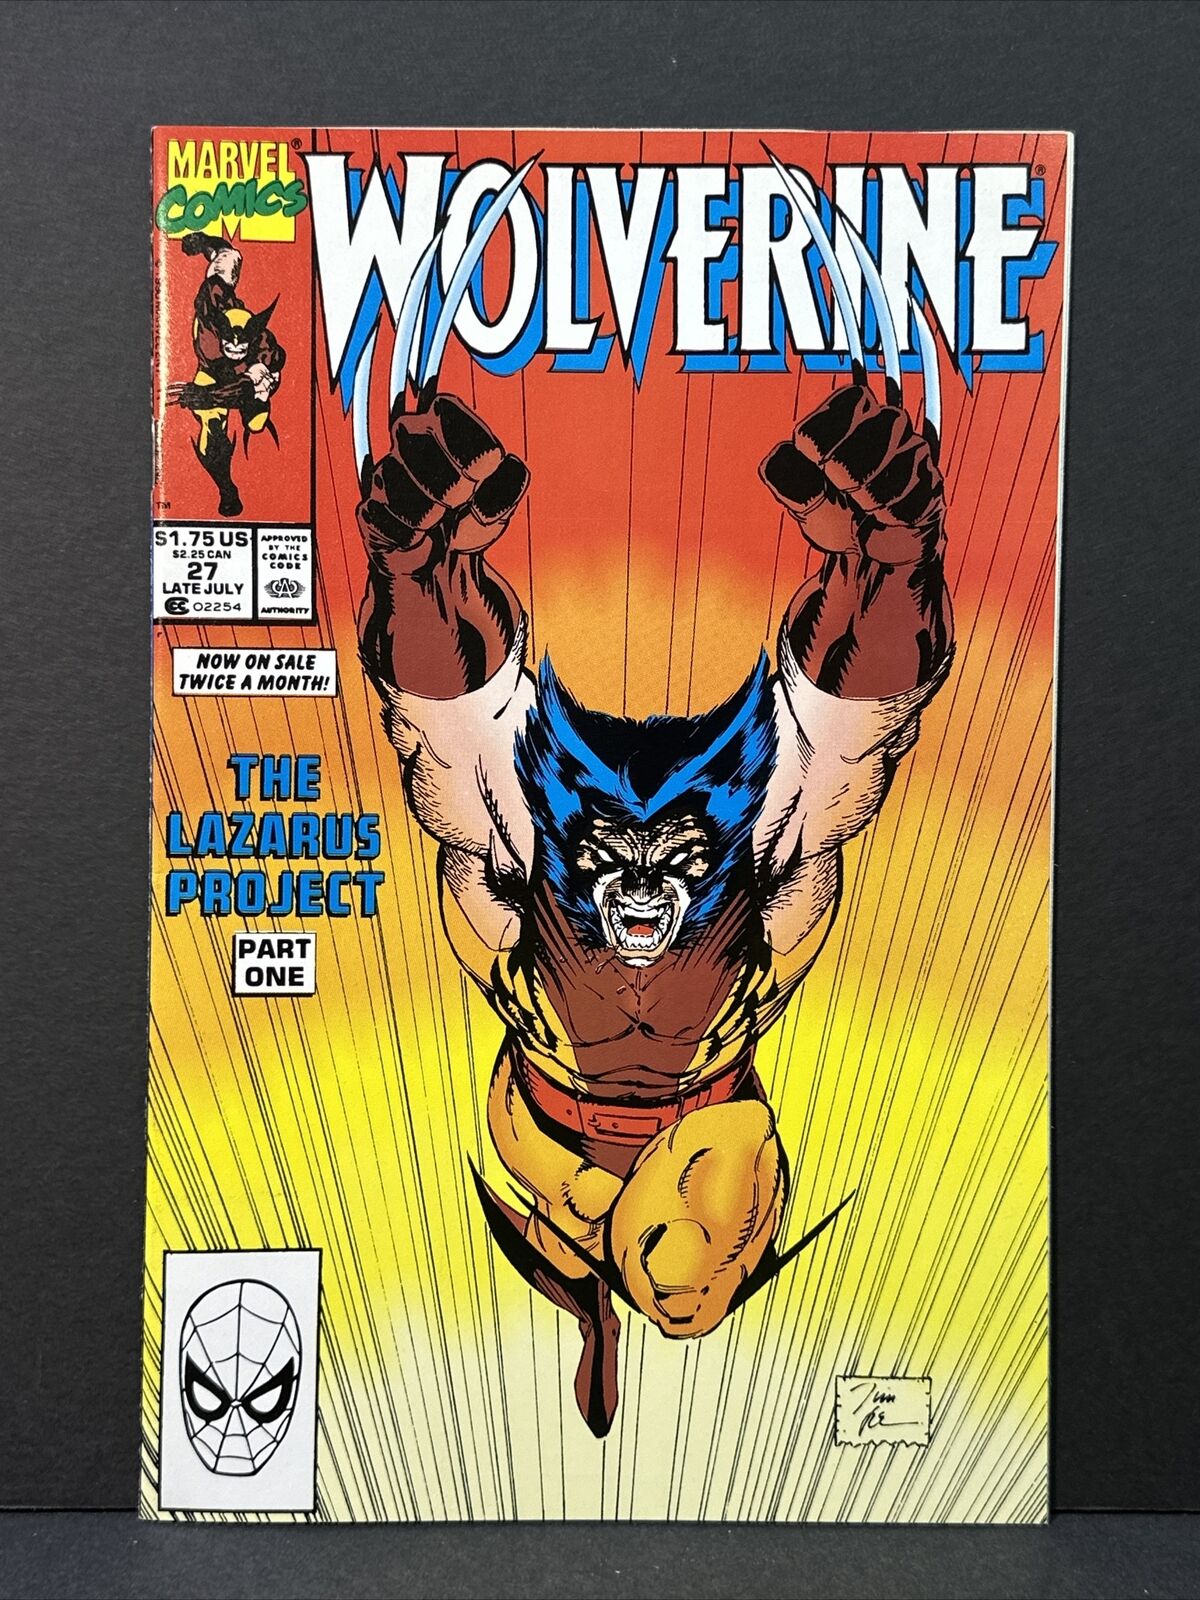 WOLVERINE #27 ICONIC JIM LEE COVER MARVEL 1990 NM 9.4